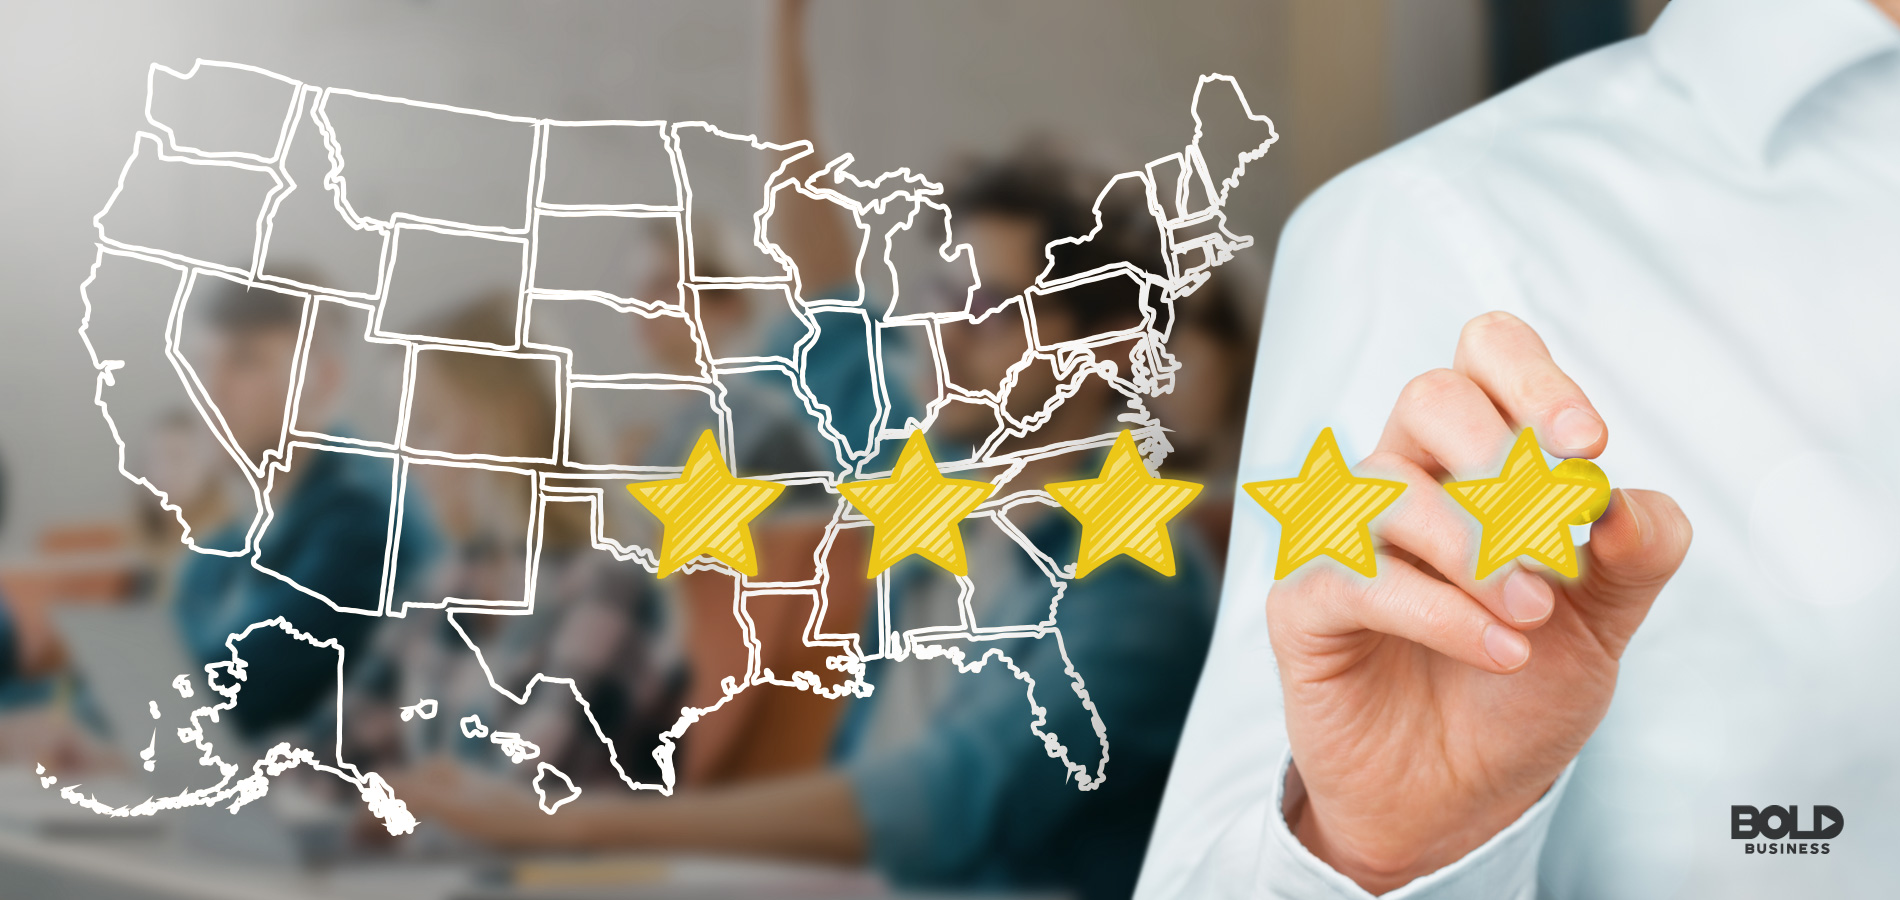 a photo of man's torso in white polo placing five gold stars front and center amid a background of a map in white sketch of the USA, symbolizing Bold Business' list of States ranked by education quality